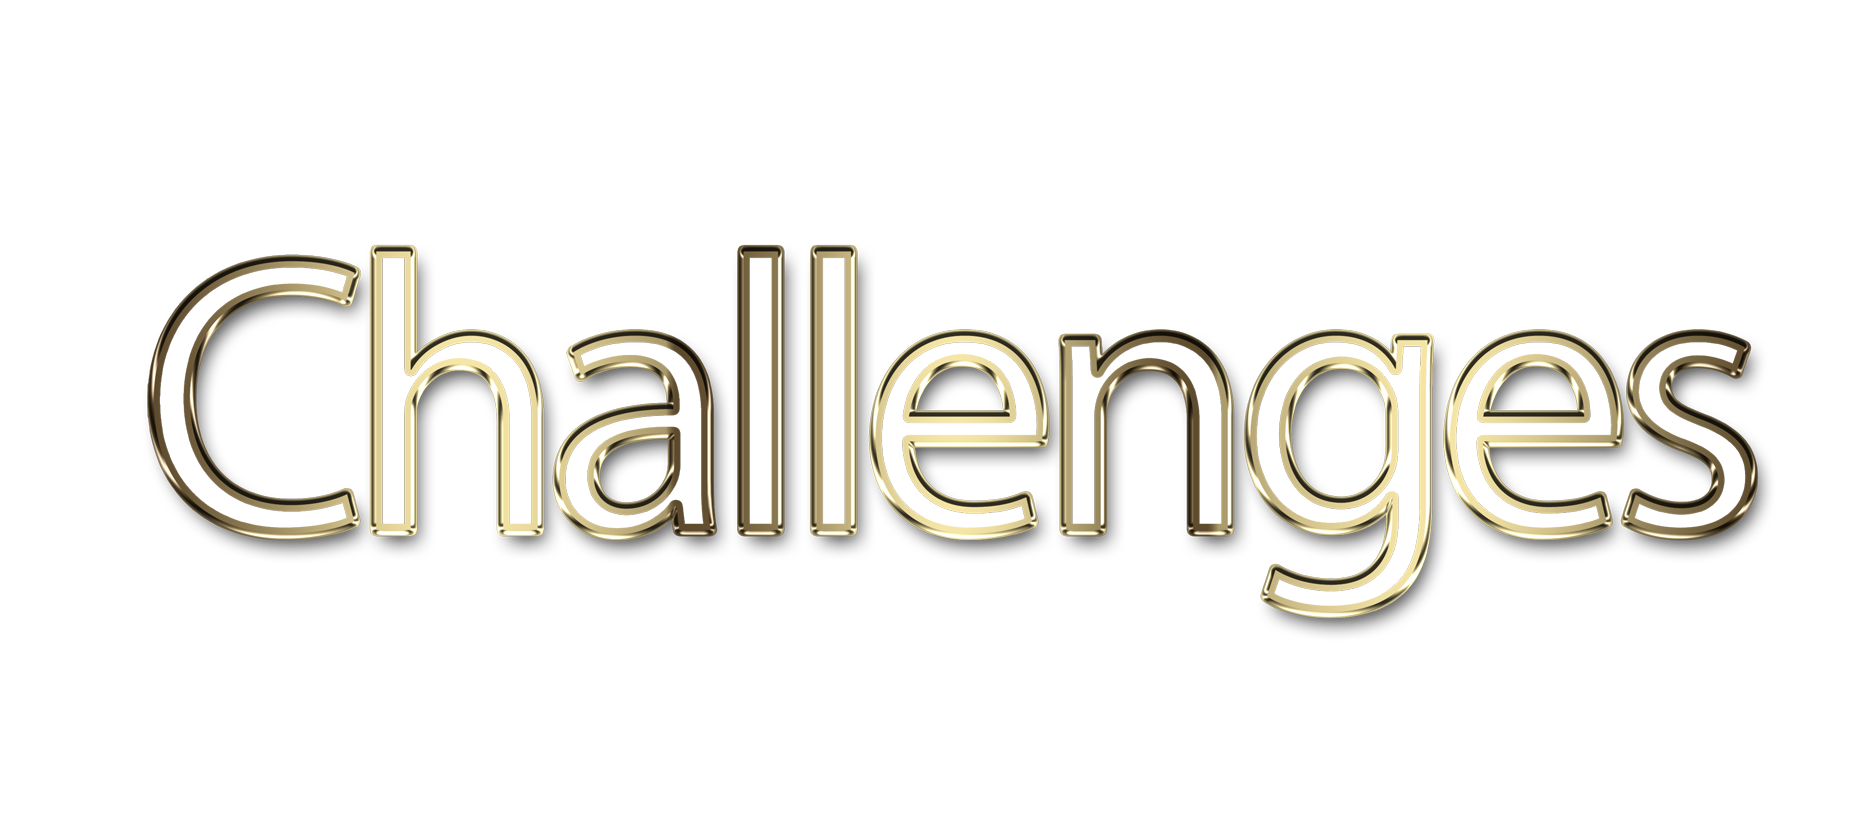 Challenges png, word Challenges png, Challenges word png, Challenges text png, Challenges letters png, Challenges word art typography PNG images, transparent png